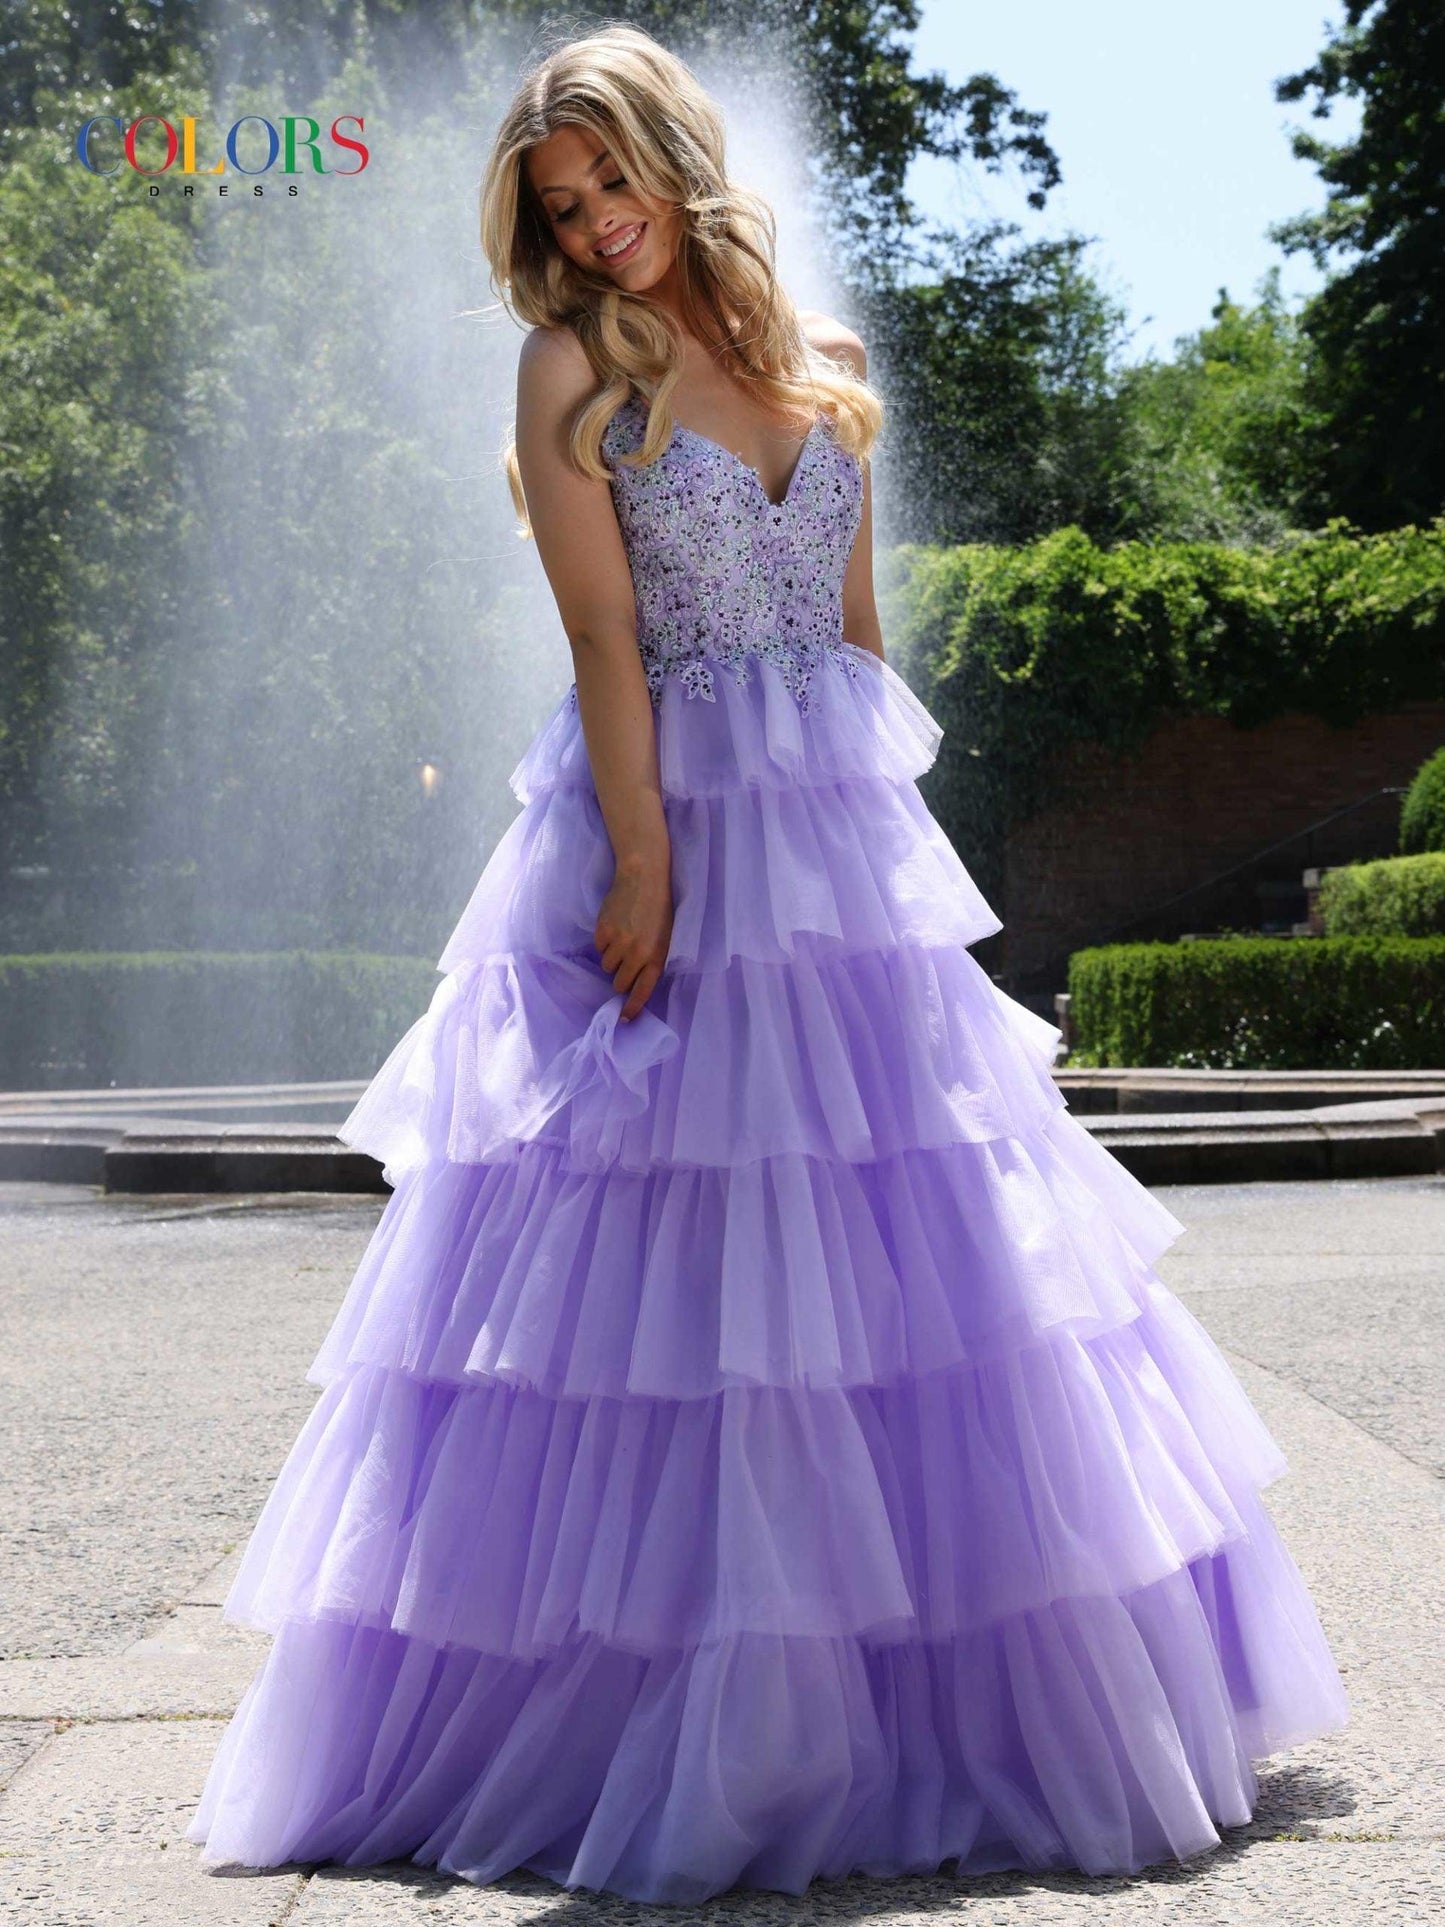 Colors Spaghetti Strap Long Prom Dress 2911 - The Dress Outlet